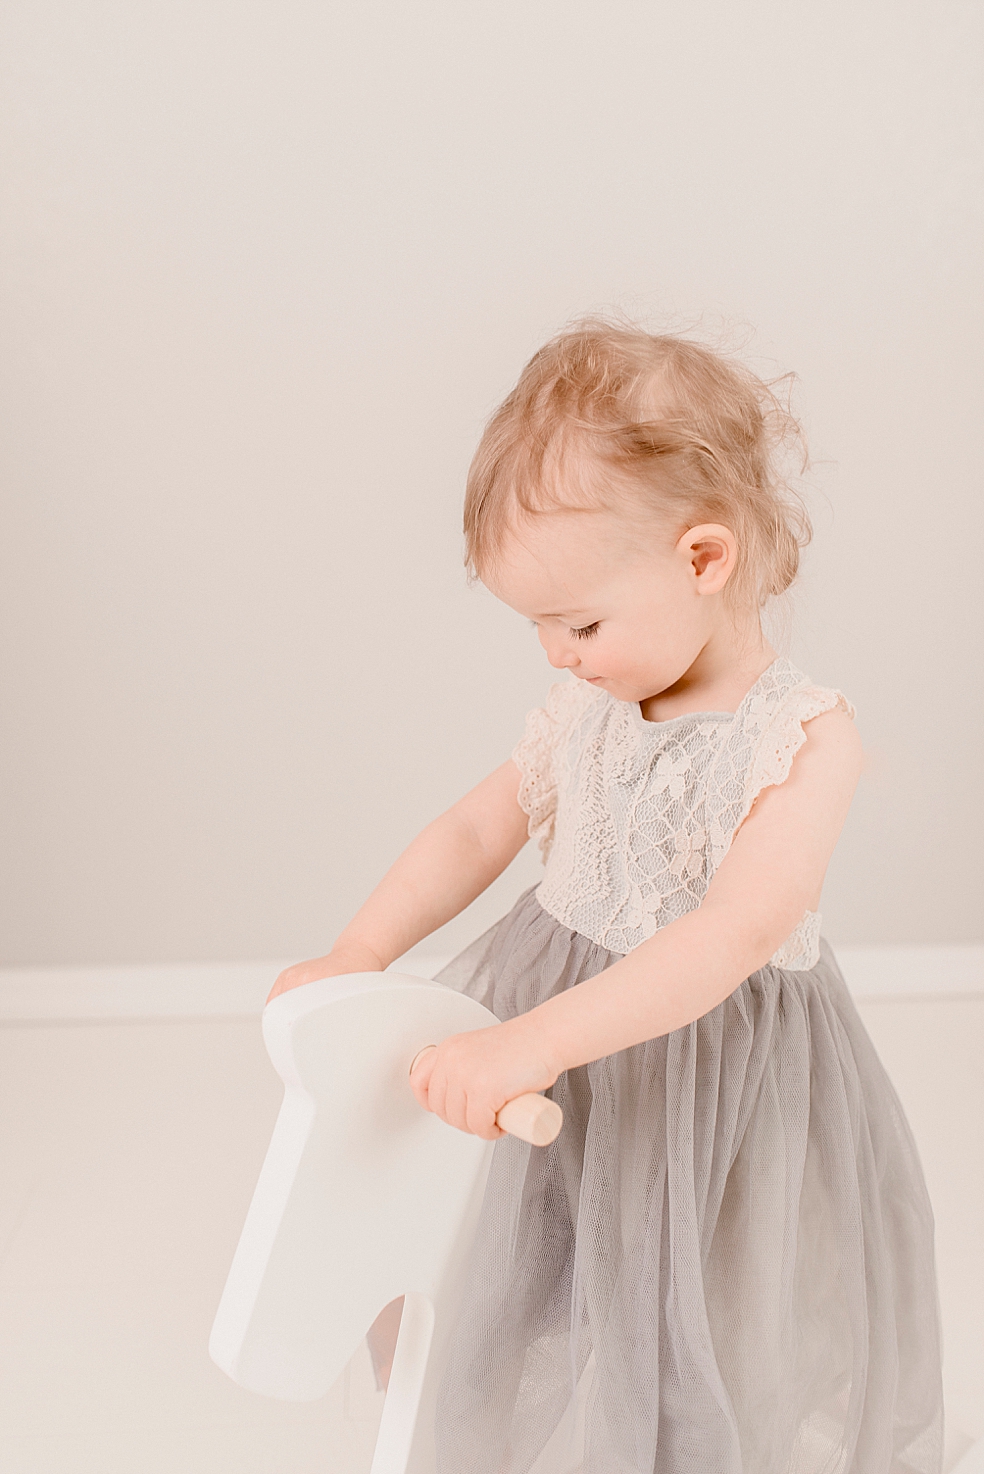 Little girl in gray tutu on white rocking horse | Photo by Jessica Lee Photography